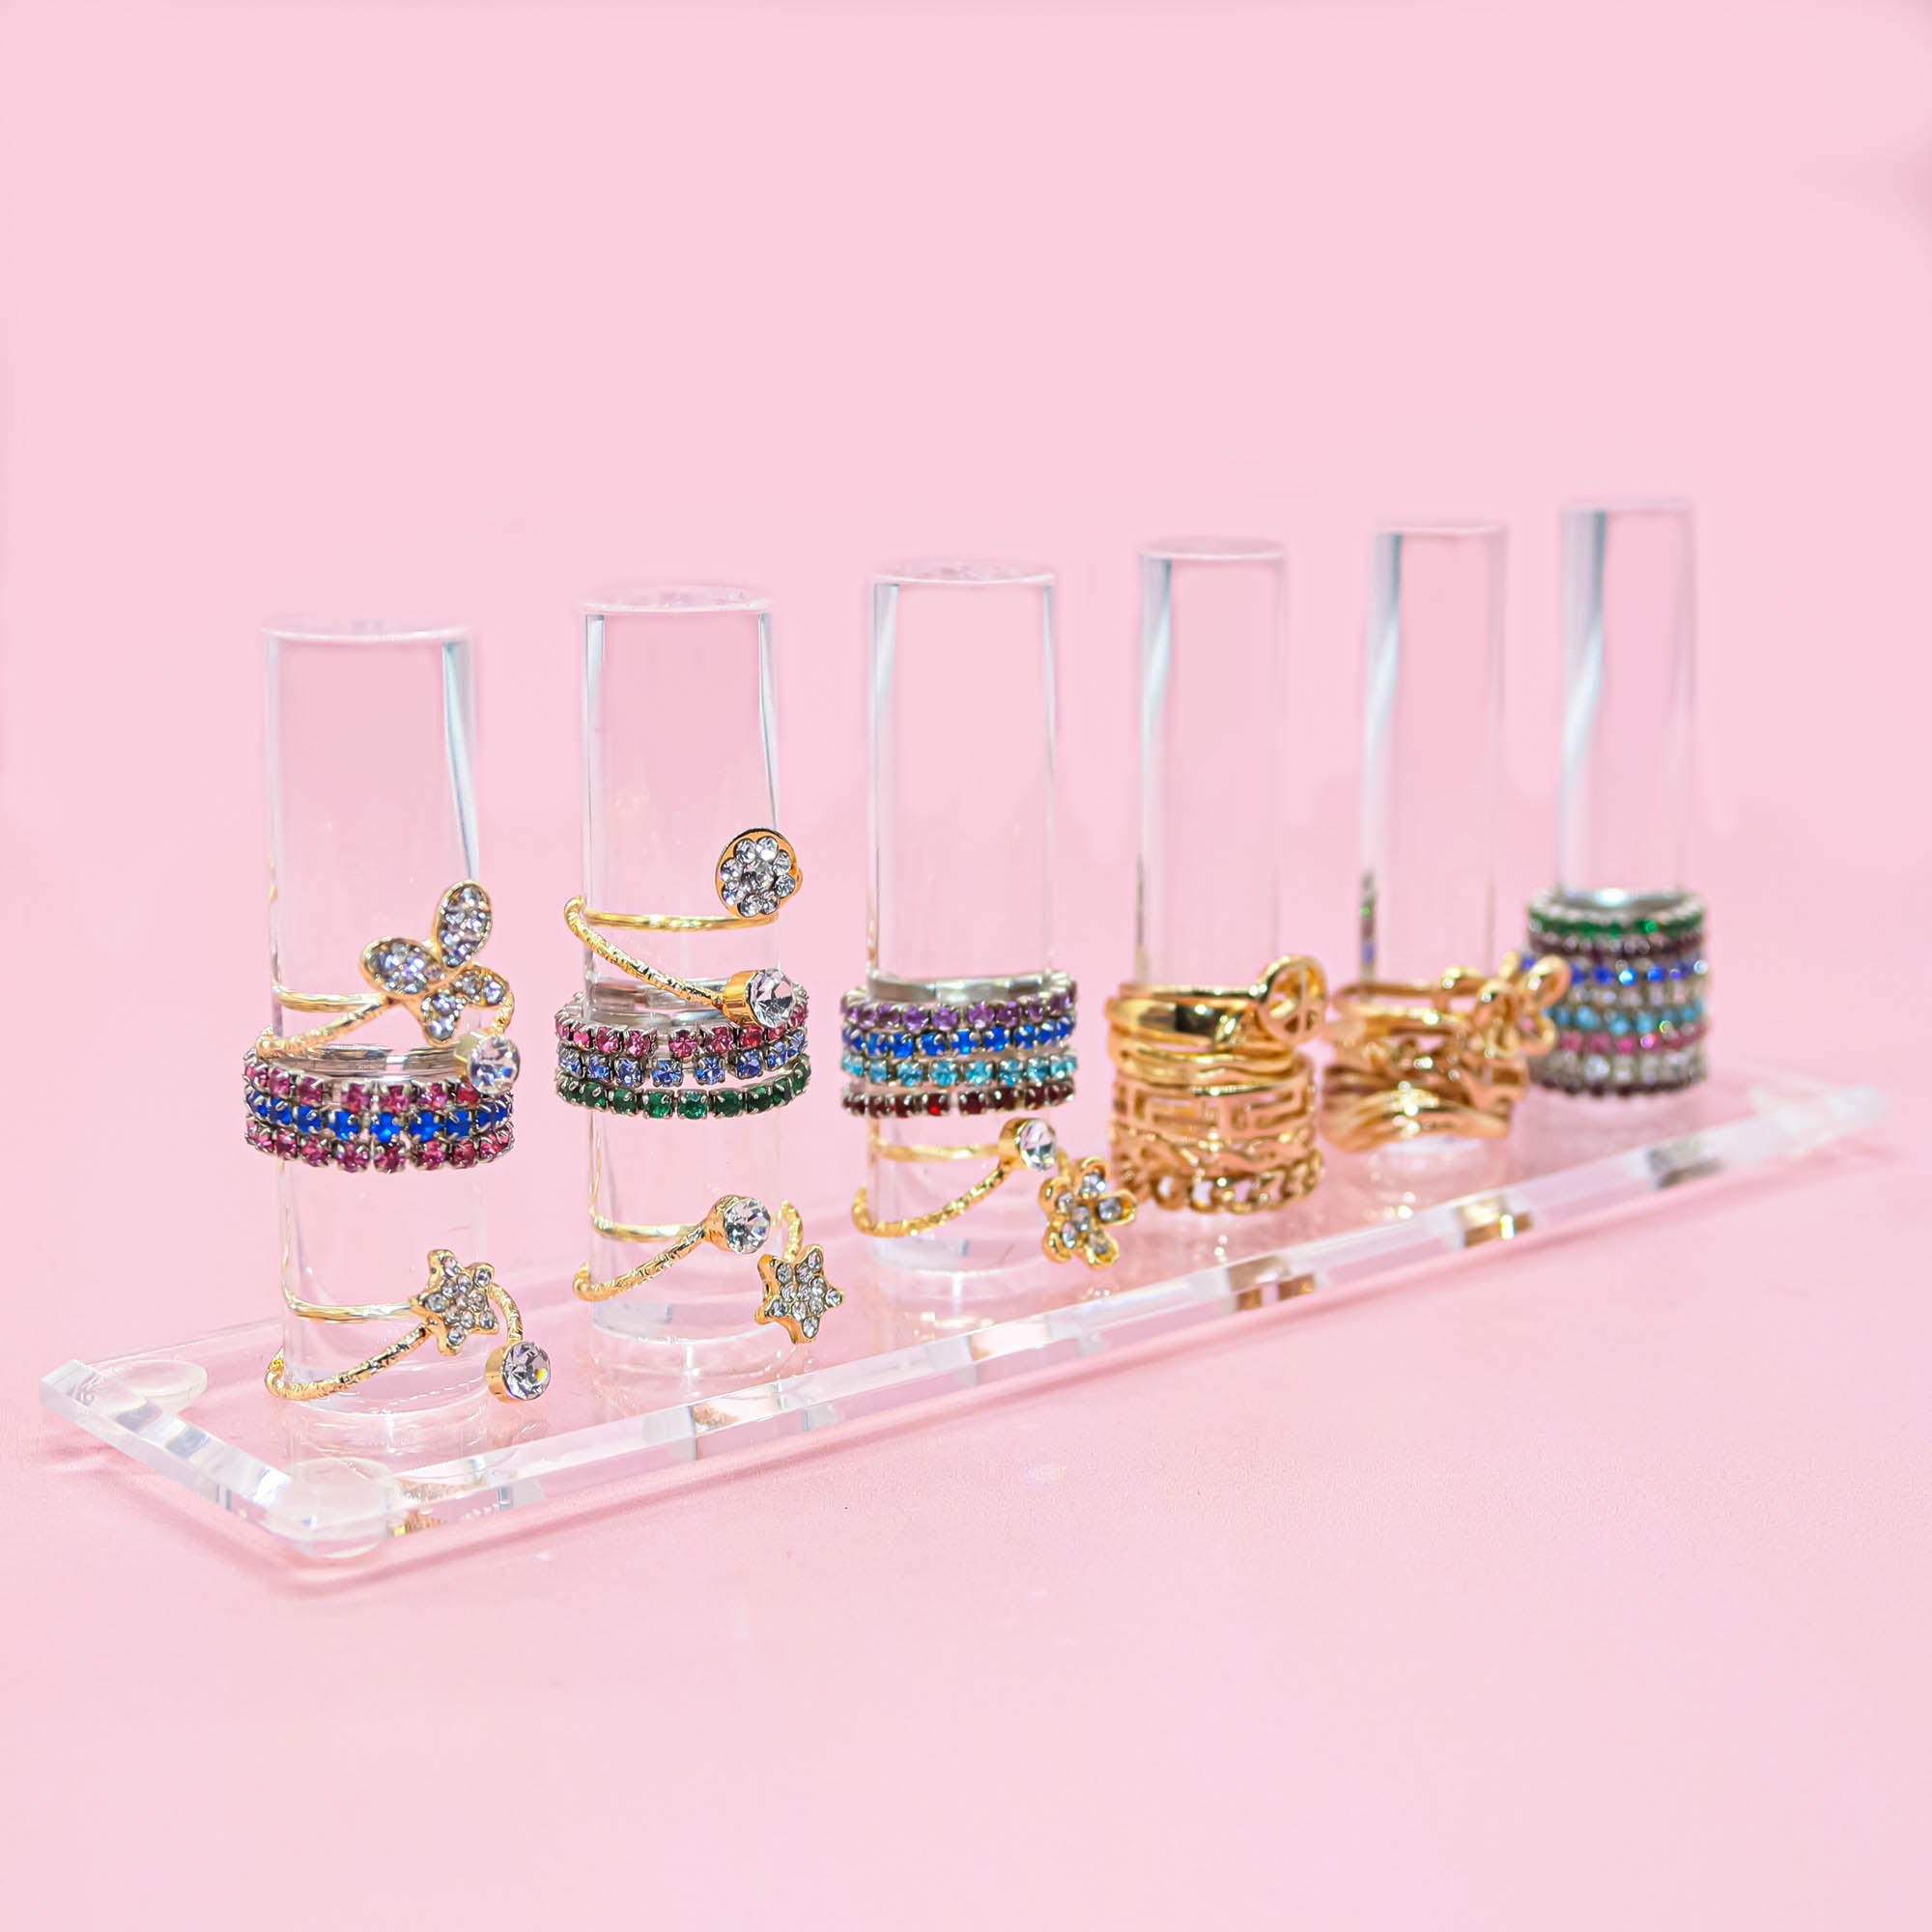 Clear Acrylic Ring Holder Organizer for Jewelry - FROG SAC